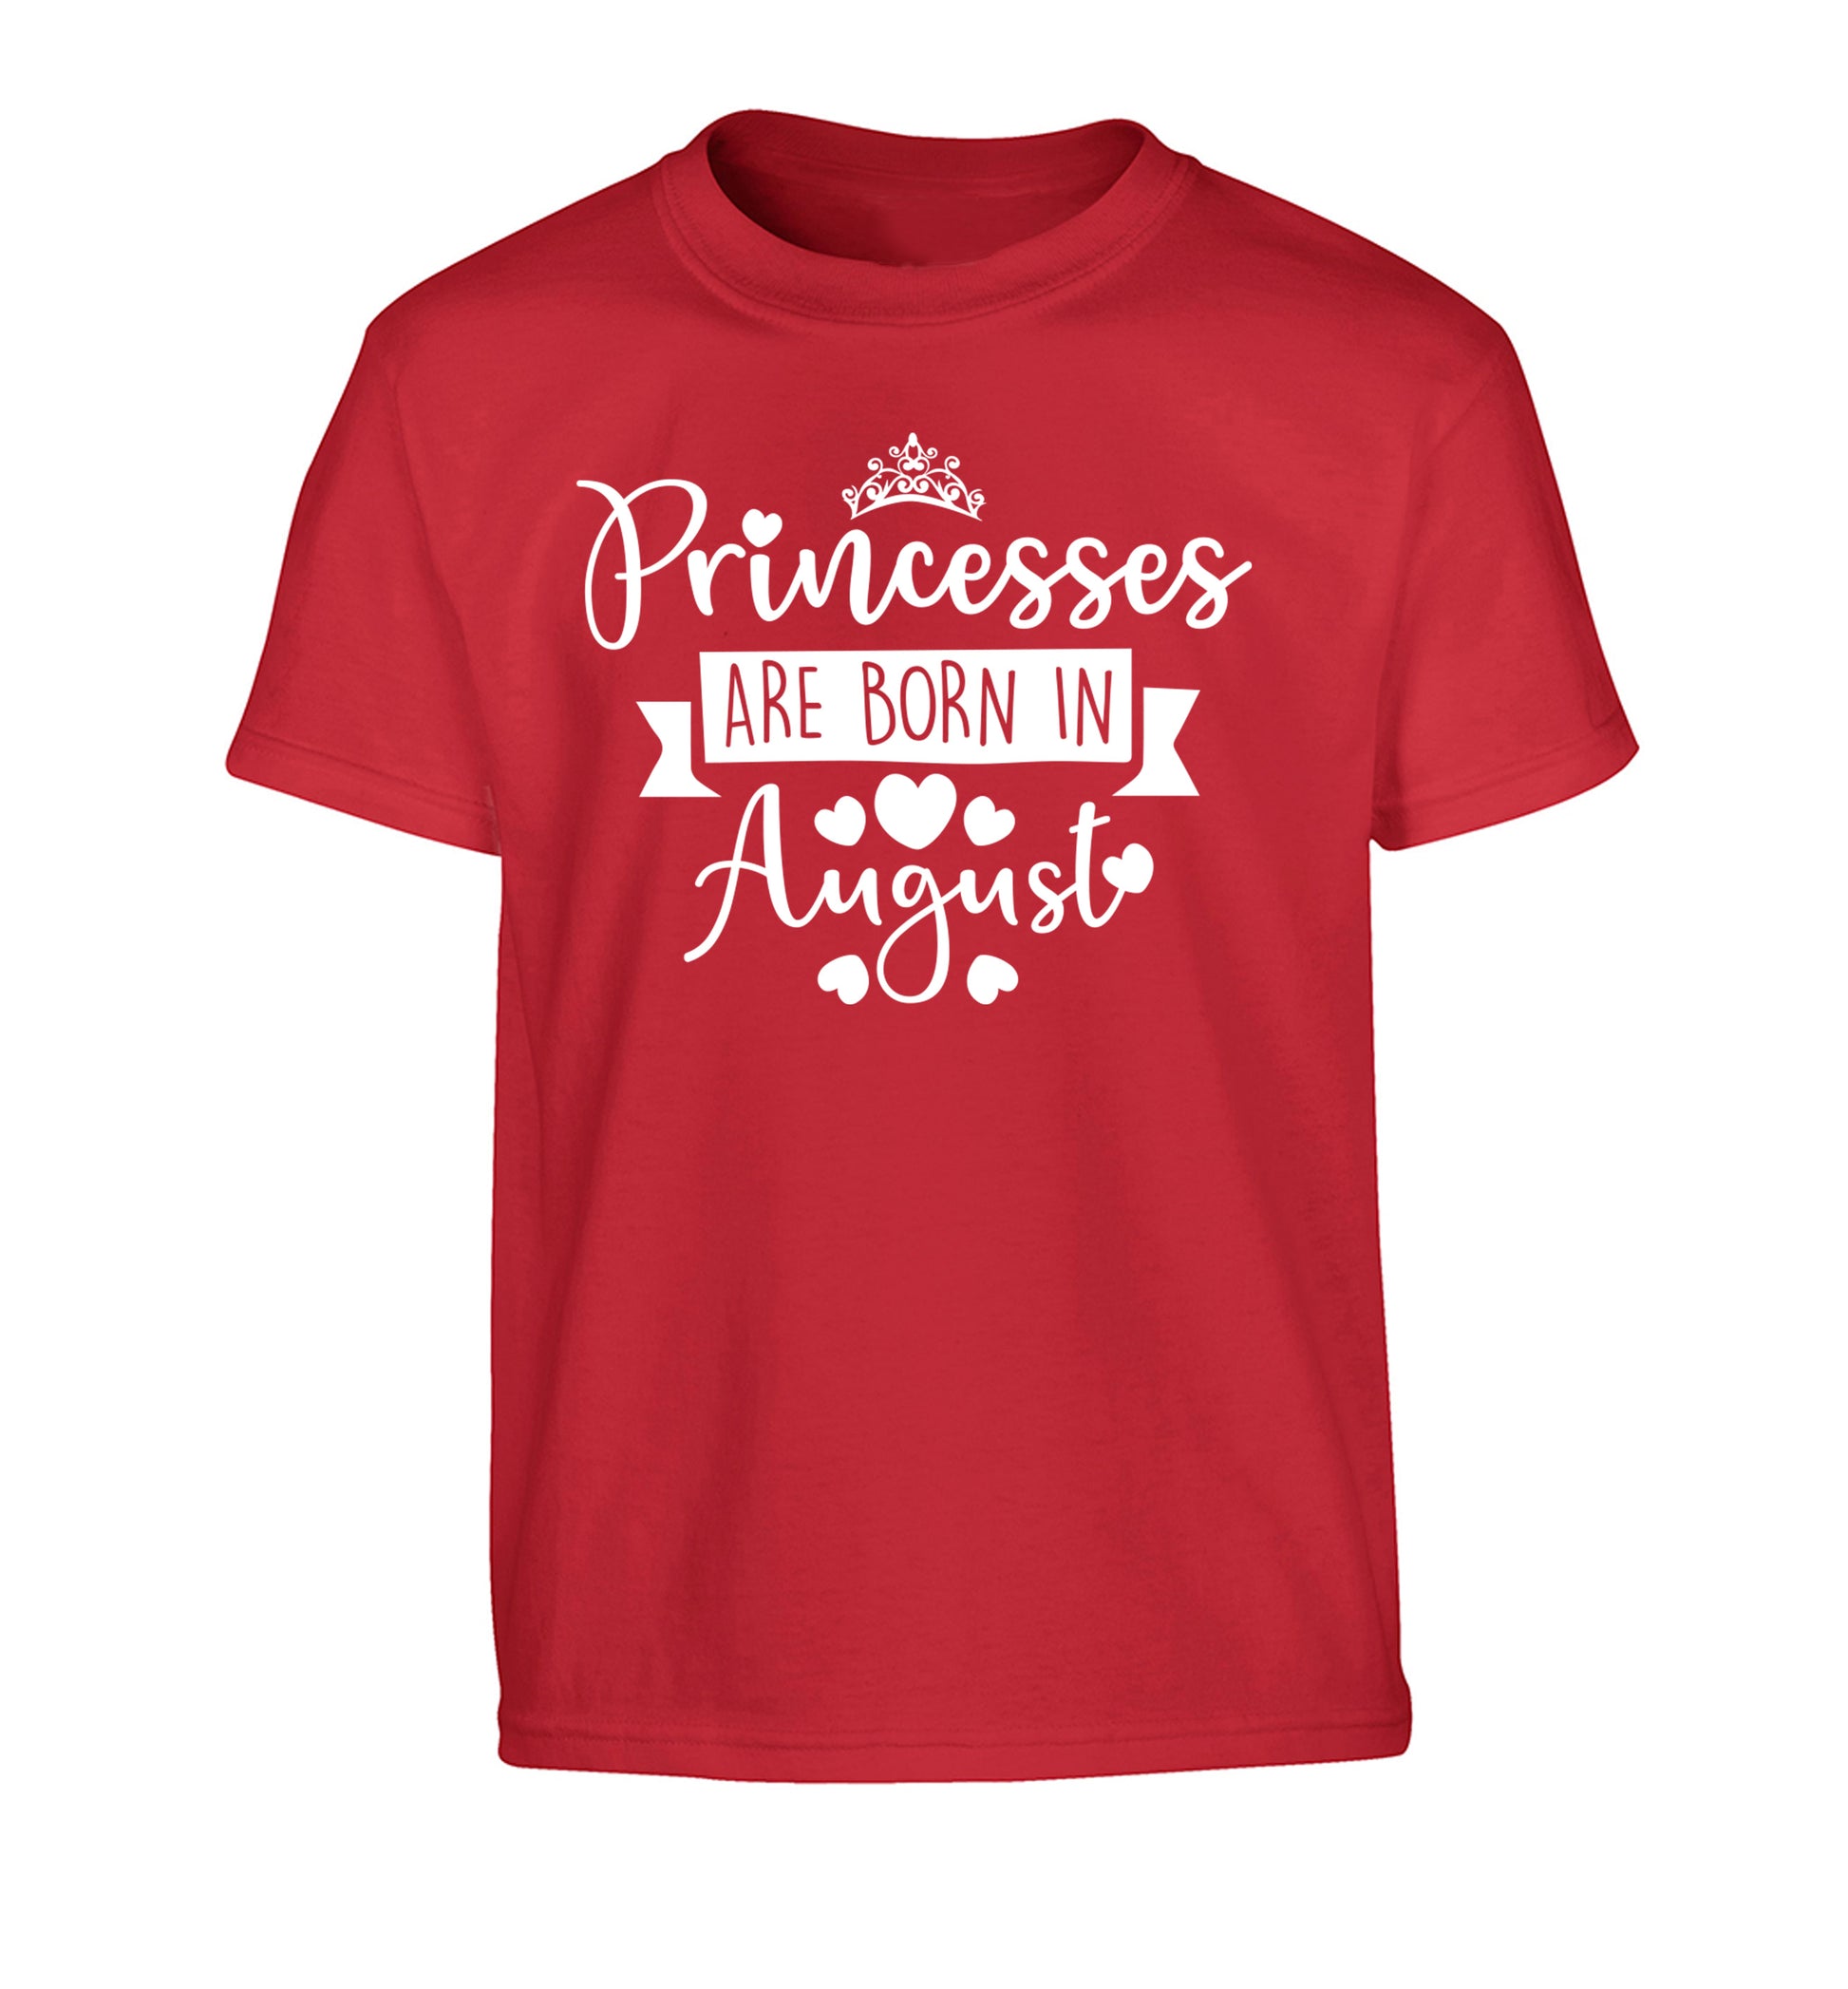 Princesses are born in August Children's red Tshirt 12-13 Years